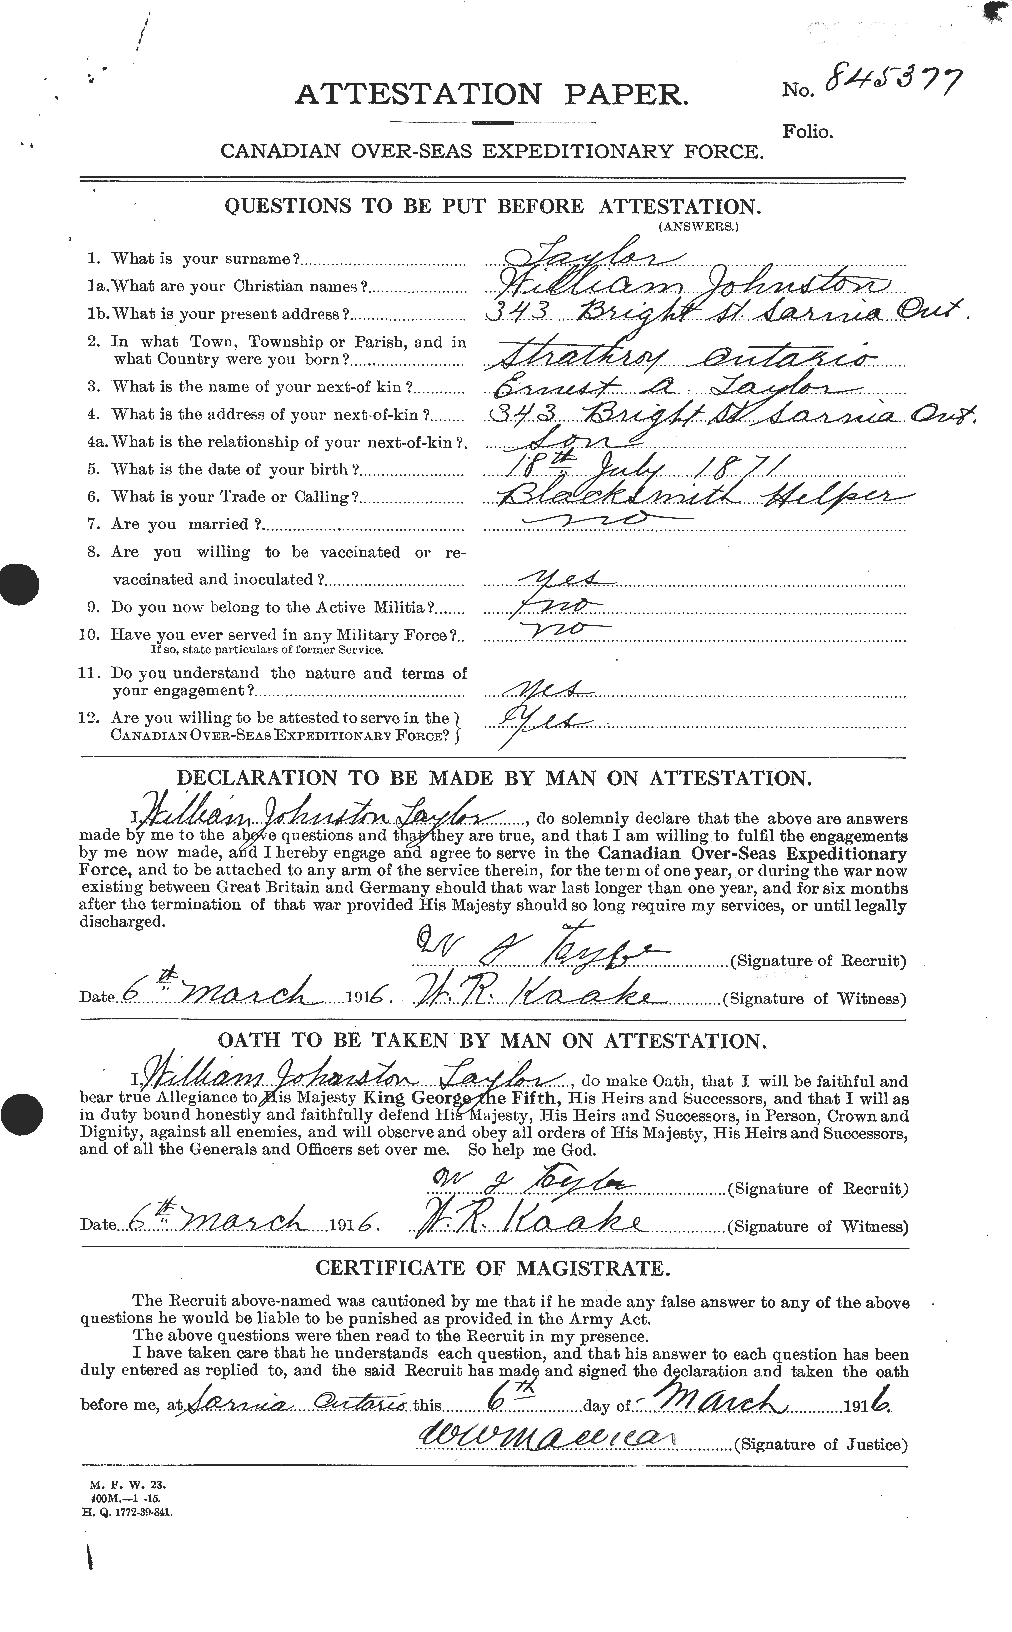 Personnel Records of the First World War - CEF 628315a